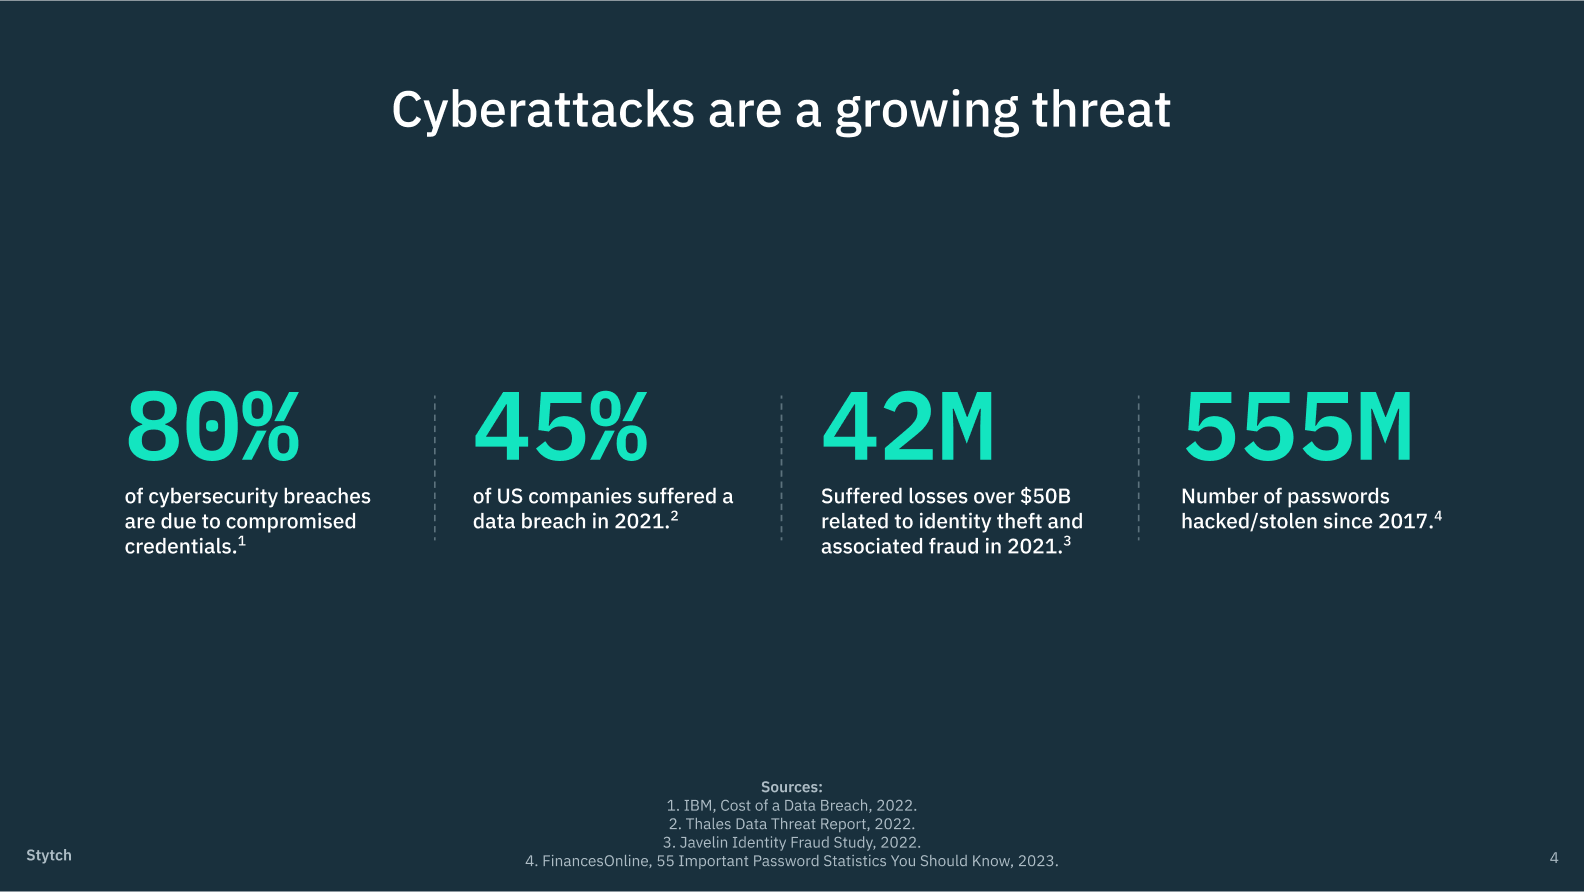 An image of four key stats about cybersecurity: 1. 80% of cybersecurity breaches are due to compromised credentials. 2. 45% of US companies suffered a data breach in 2021. 3. 42M companies suffered losses over $50B related to identity theft and associated fraud in 2021. 4. 555M = number of passwords hacked/stolen since 2017.